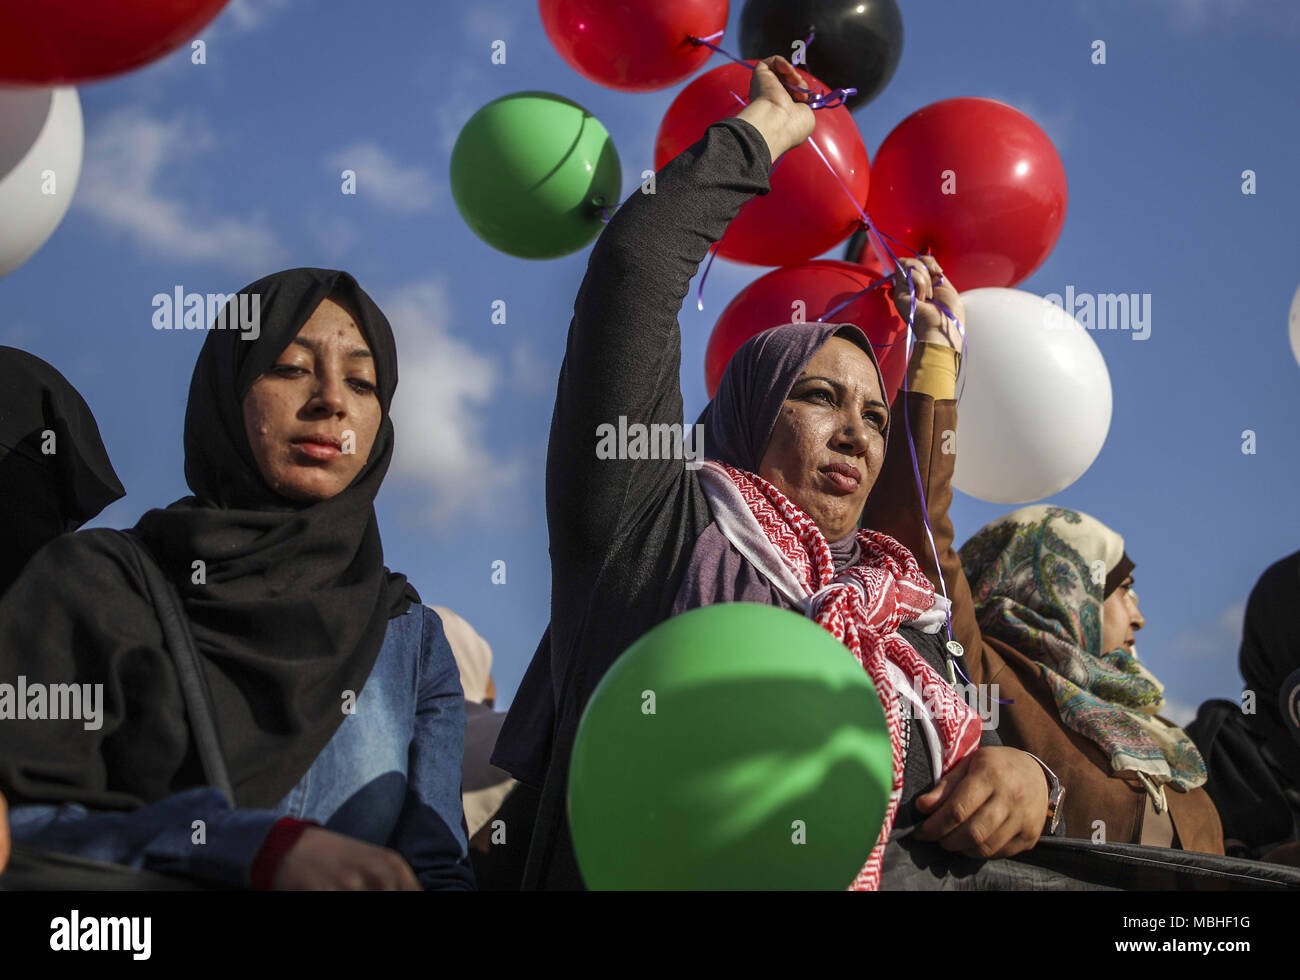 Gaza. 10th Apr, 2018. Palestinian women hold balloons during a protest near the border between eastern Gaza and Israel, on April 10, 2018. The mass protest, known as the 'Great March of Return,' demands Palestinian refugees' right to return to their homes occupied by Israel. Credit: Wissam Nassar/Xinhua/Alamy Live News Stock Photo